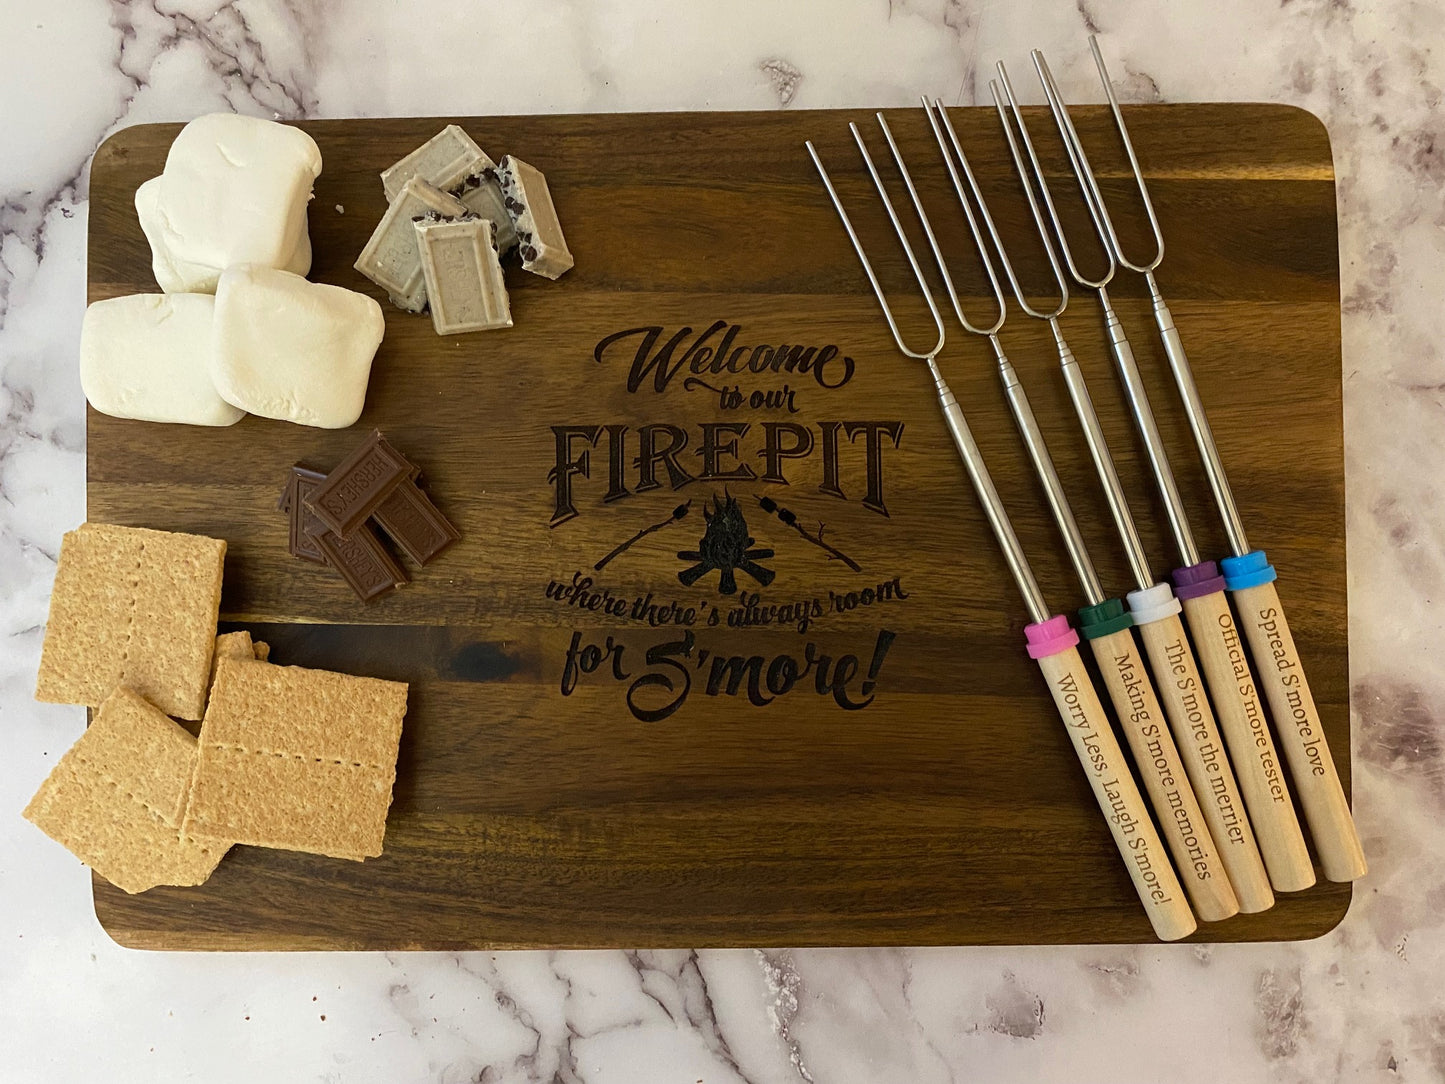 S'mores Station Set for the Firepit (There's Always Room for S'more!)